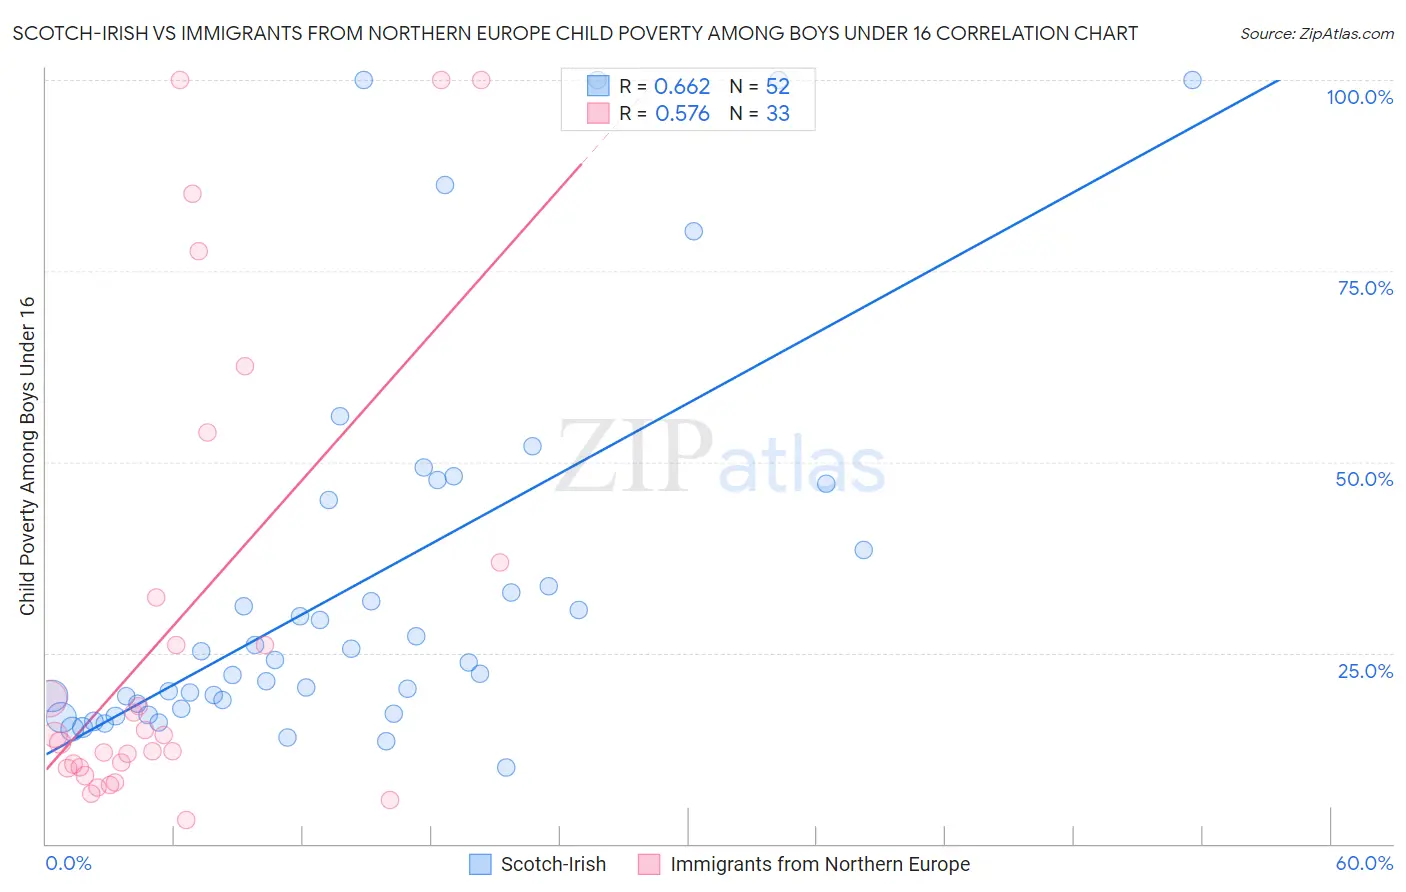 Scotch-Irish vs Immigrants from Northern Europe Child Poverty Among Boys Under 16